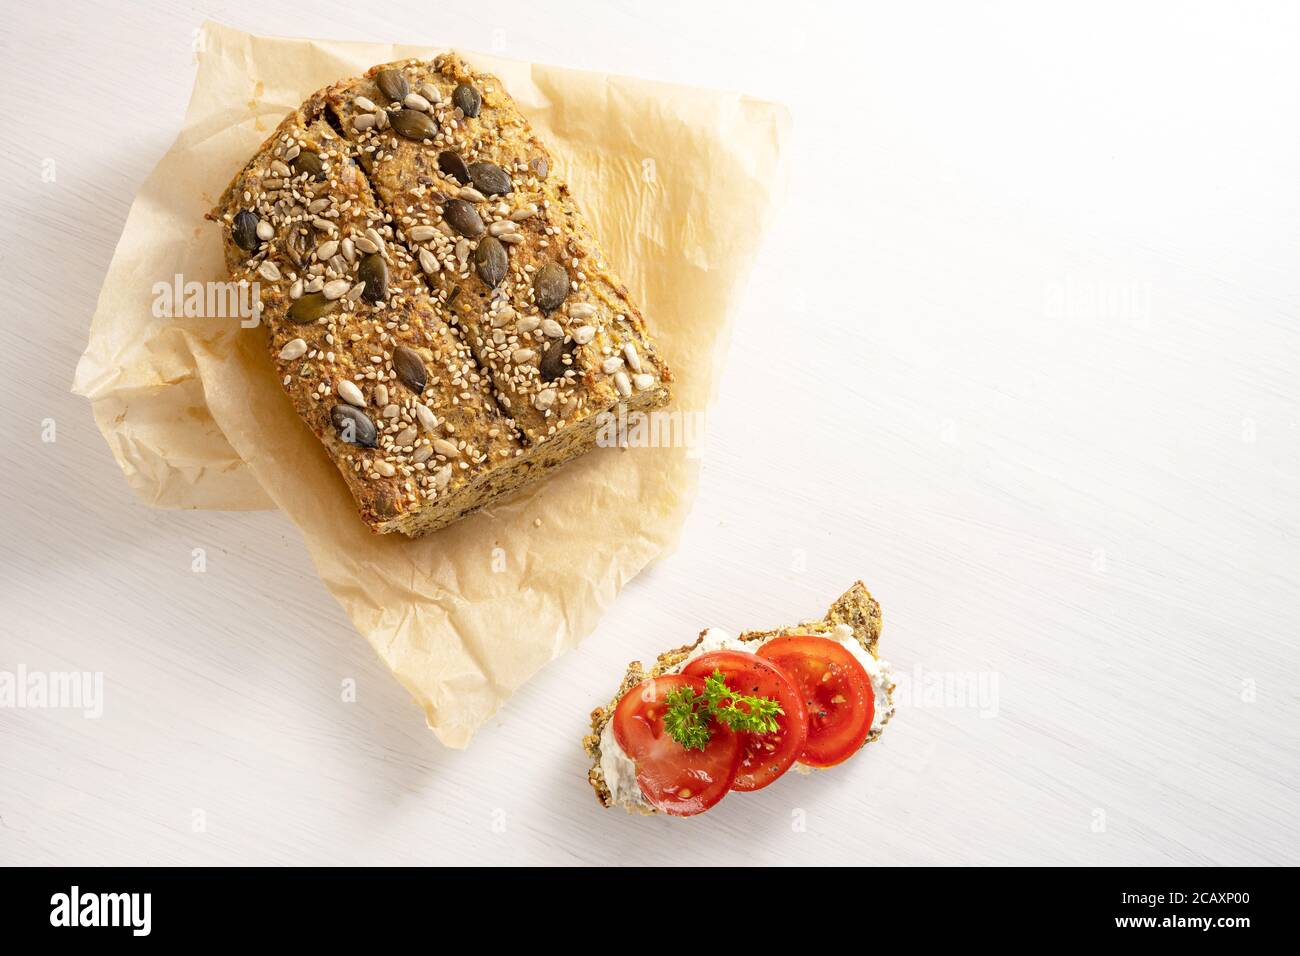 Low carb protein bread with seeds on baking paper and a tomato sandwich with parsley garnish on a white table, healthy slimming diet, copy space high Stock Photo